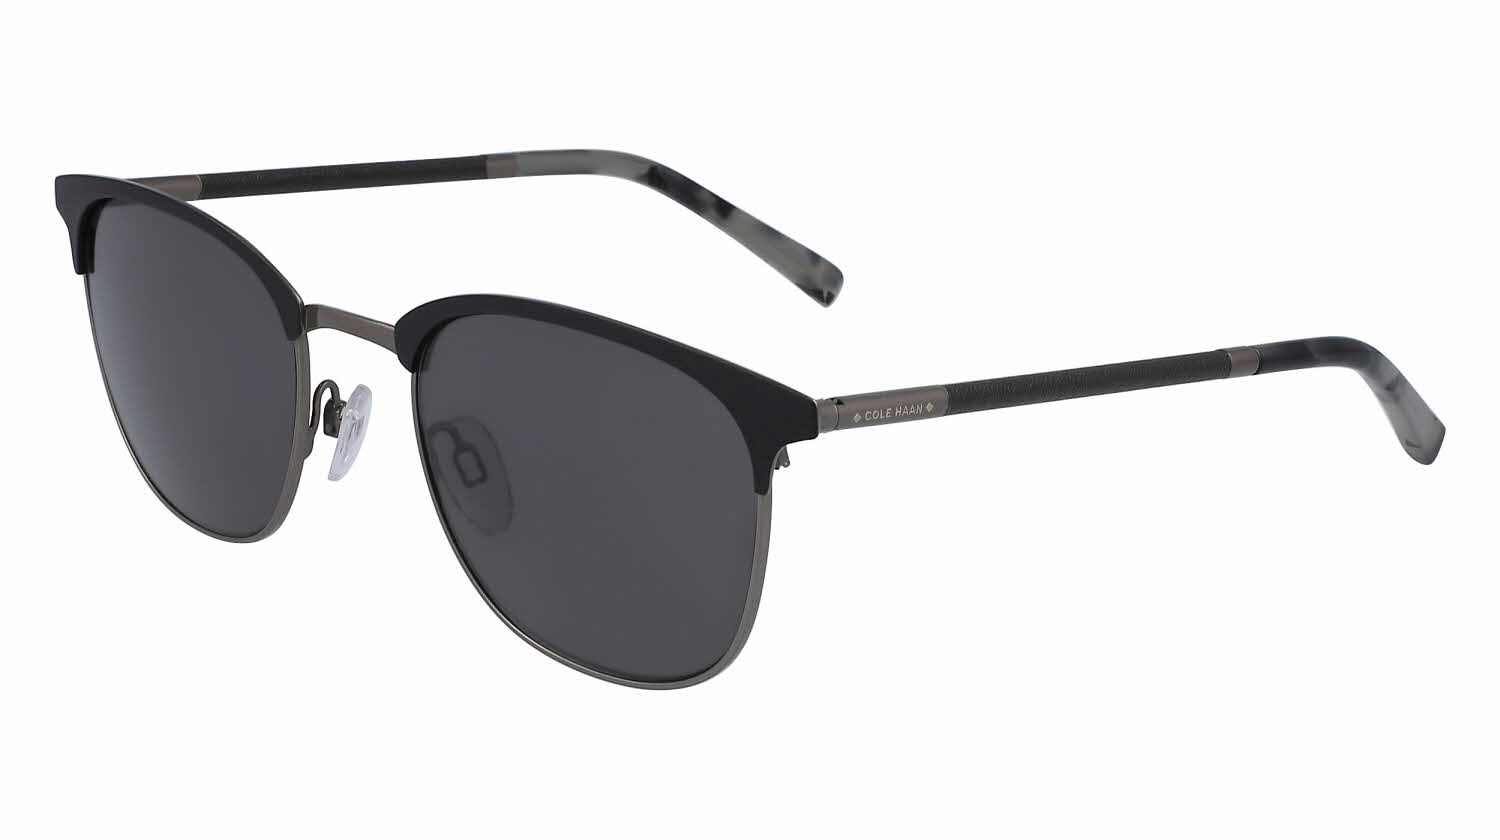 Cole Haan CH6069 Sunglasses